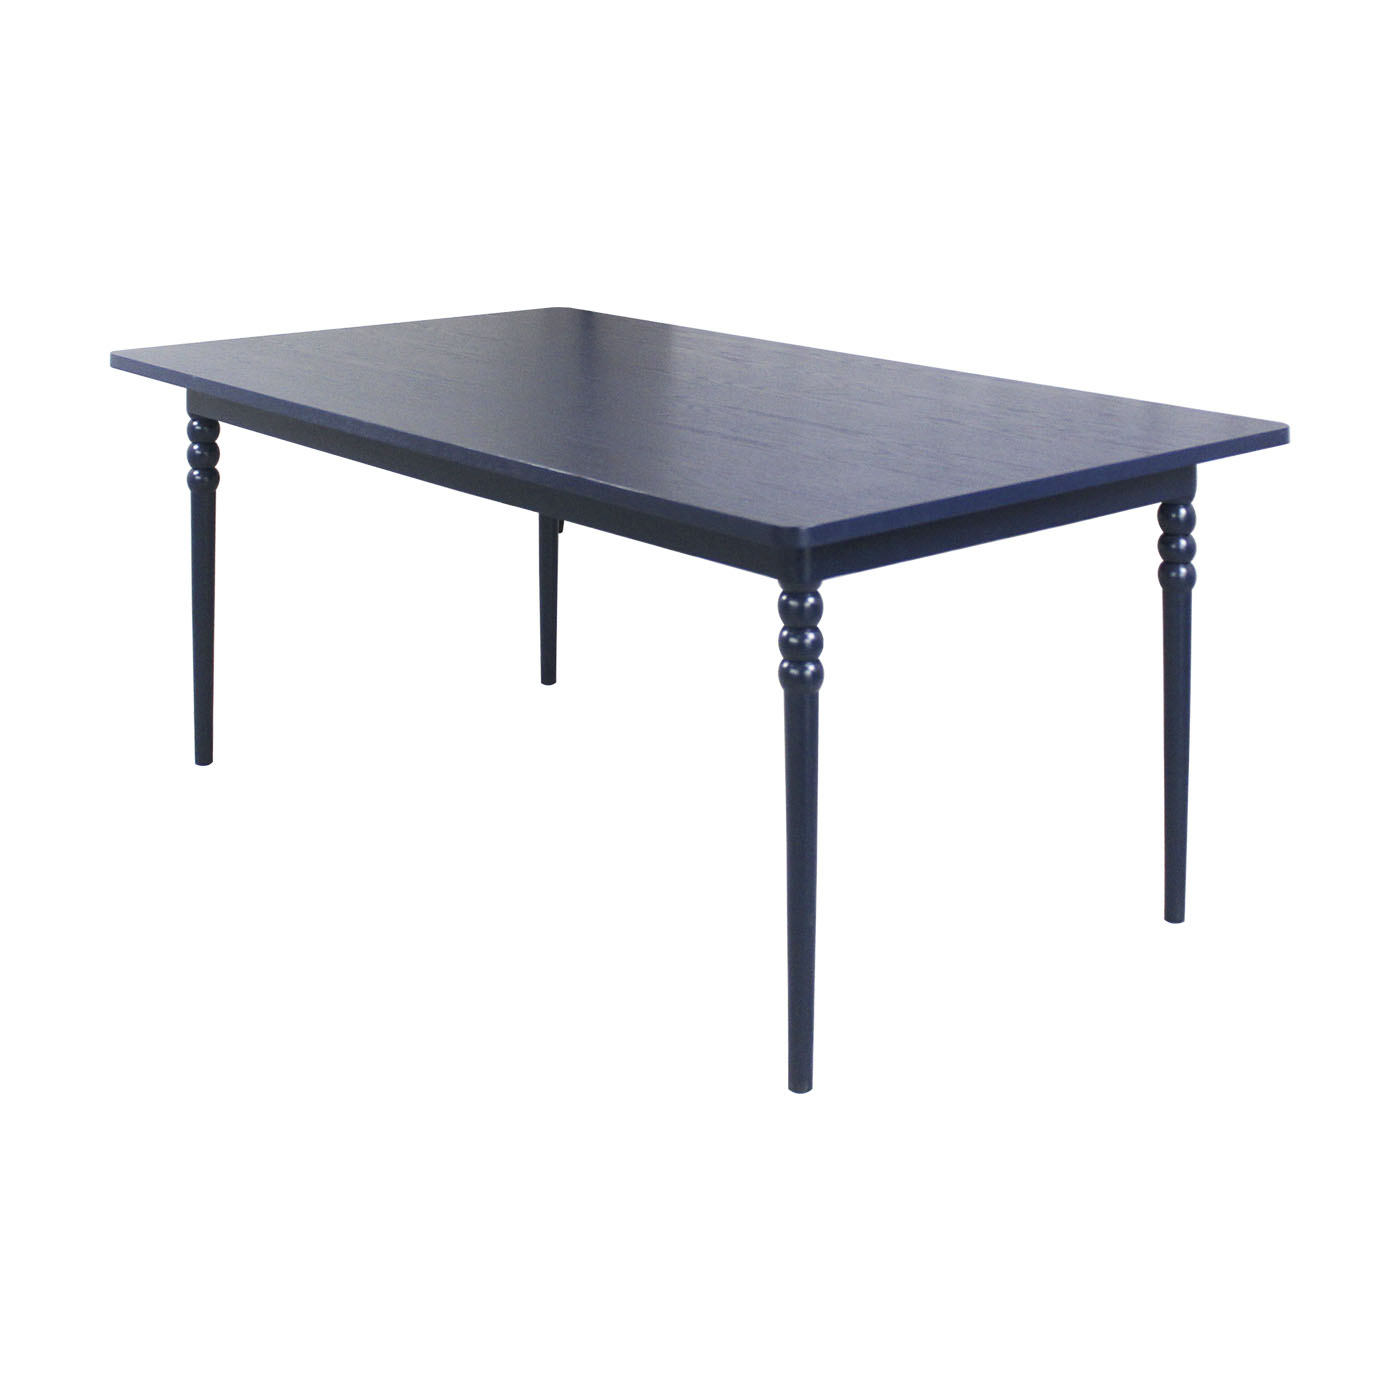 Knole Blue Dining Table